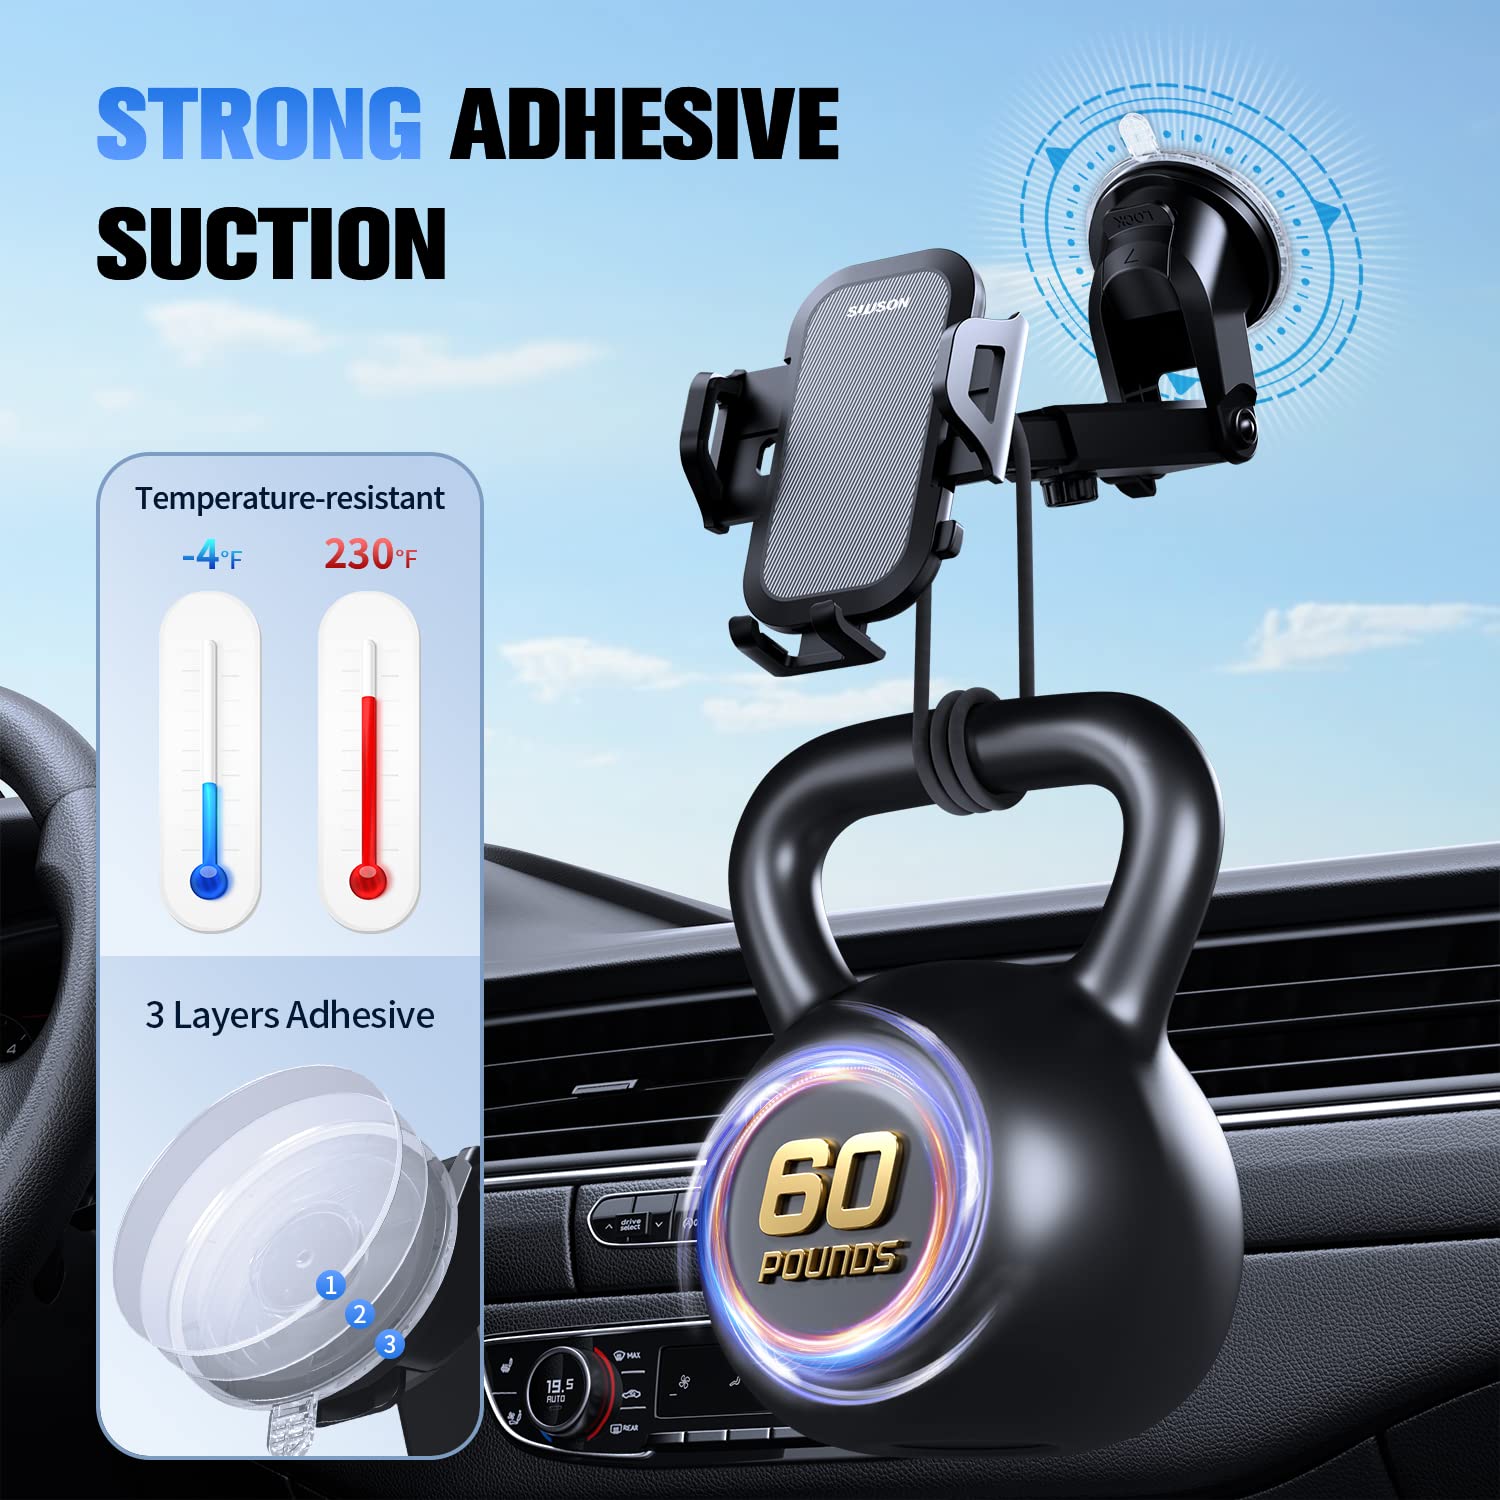 SUUSON Car Phone Holder Mount【Upgraded】-【Bumpy Roads Friendly】 Phone Mount for Car Dashboard Windshield Air Vent 3 in 1,Hand Free Mount for iPhone 14 13 12 Pro Max Samsung All Cell Phones (Gray)